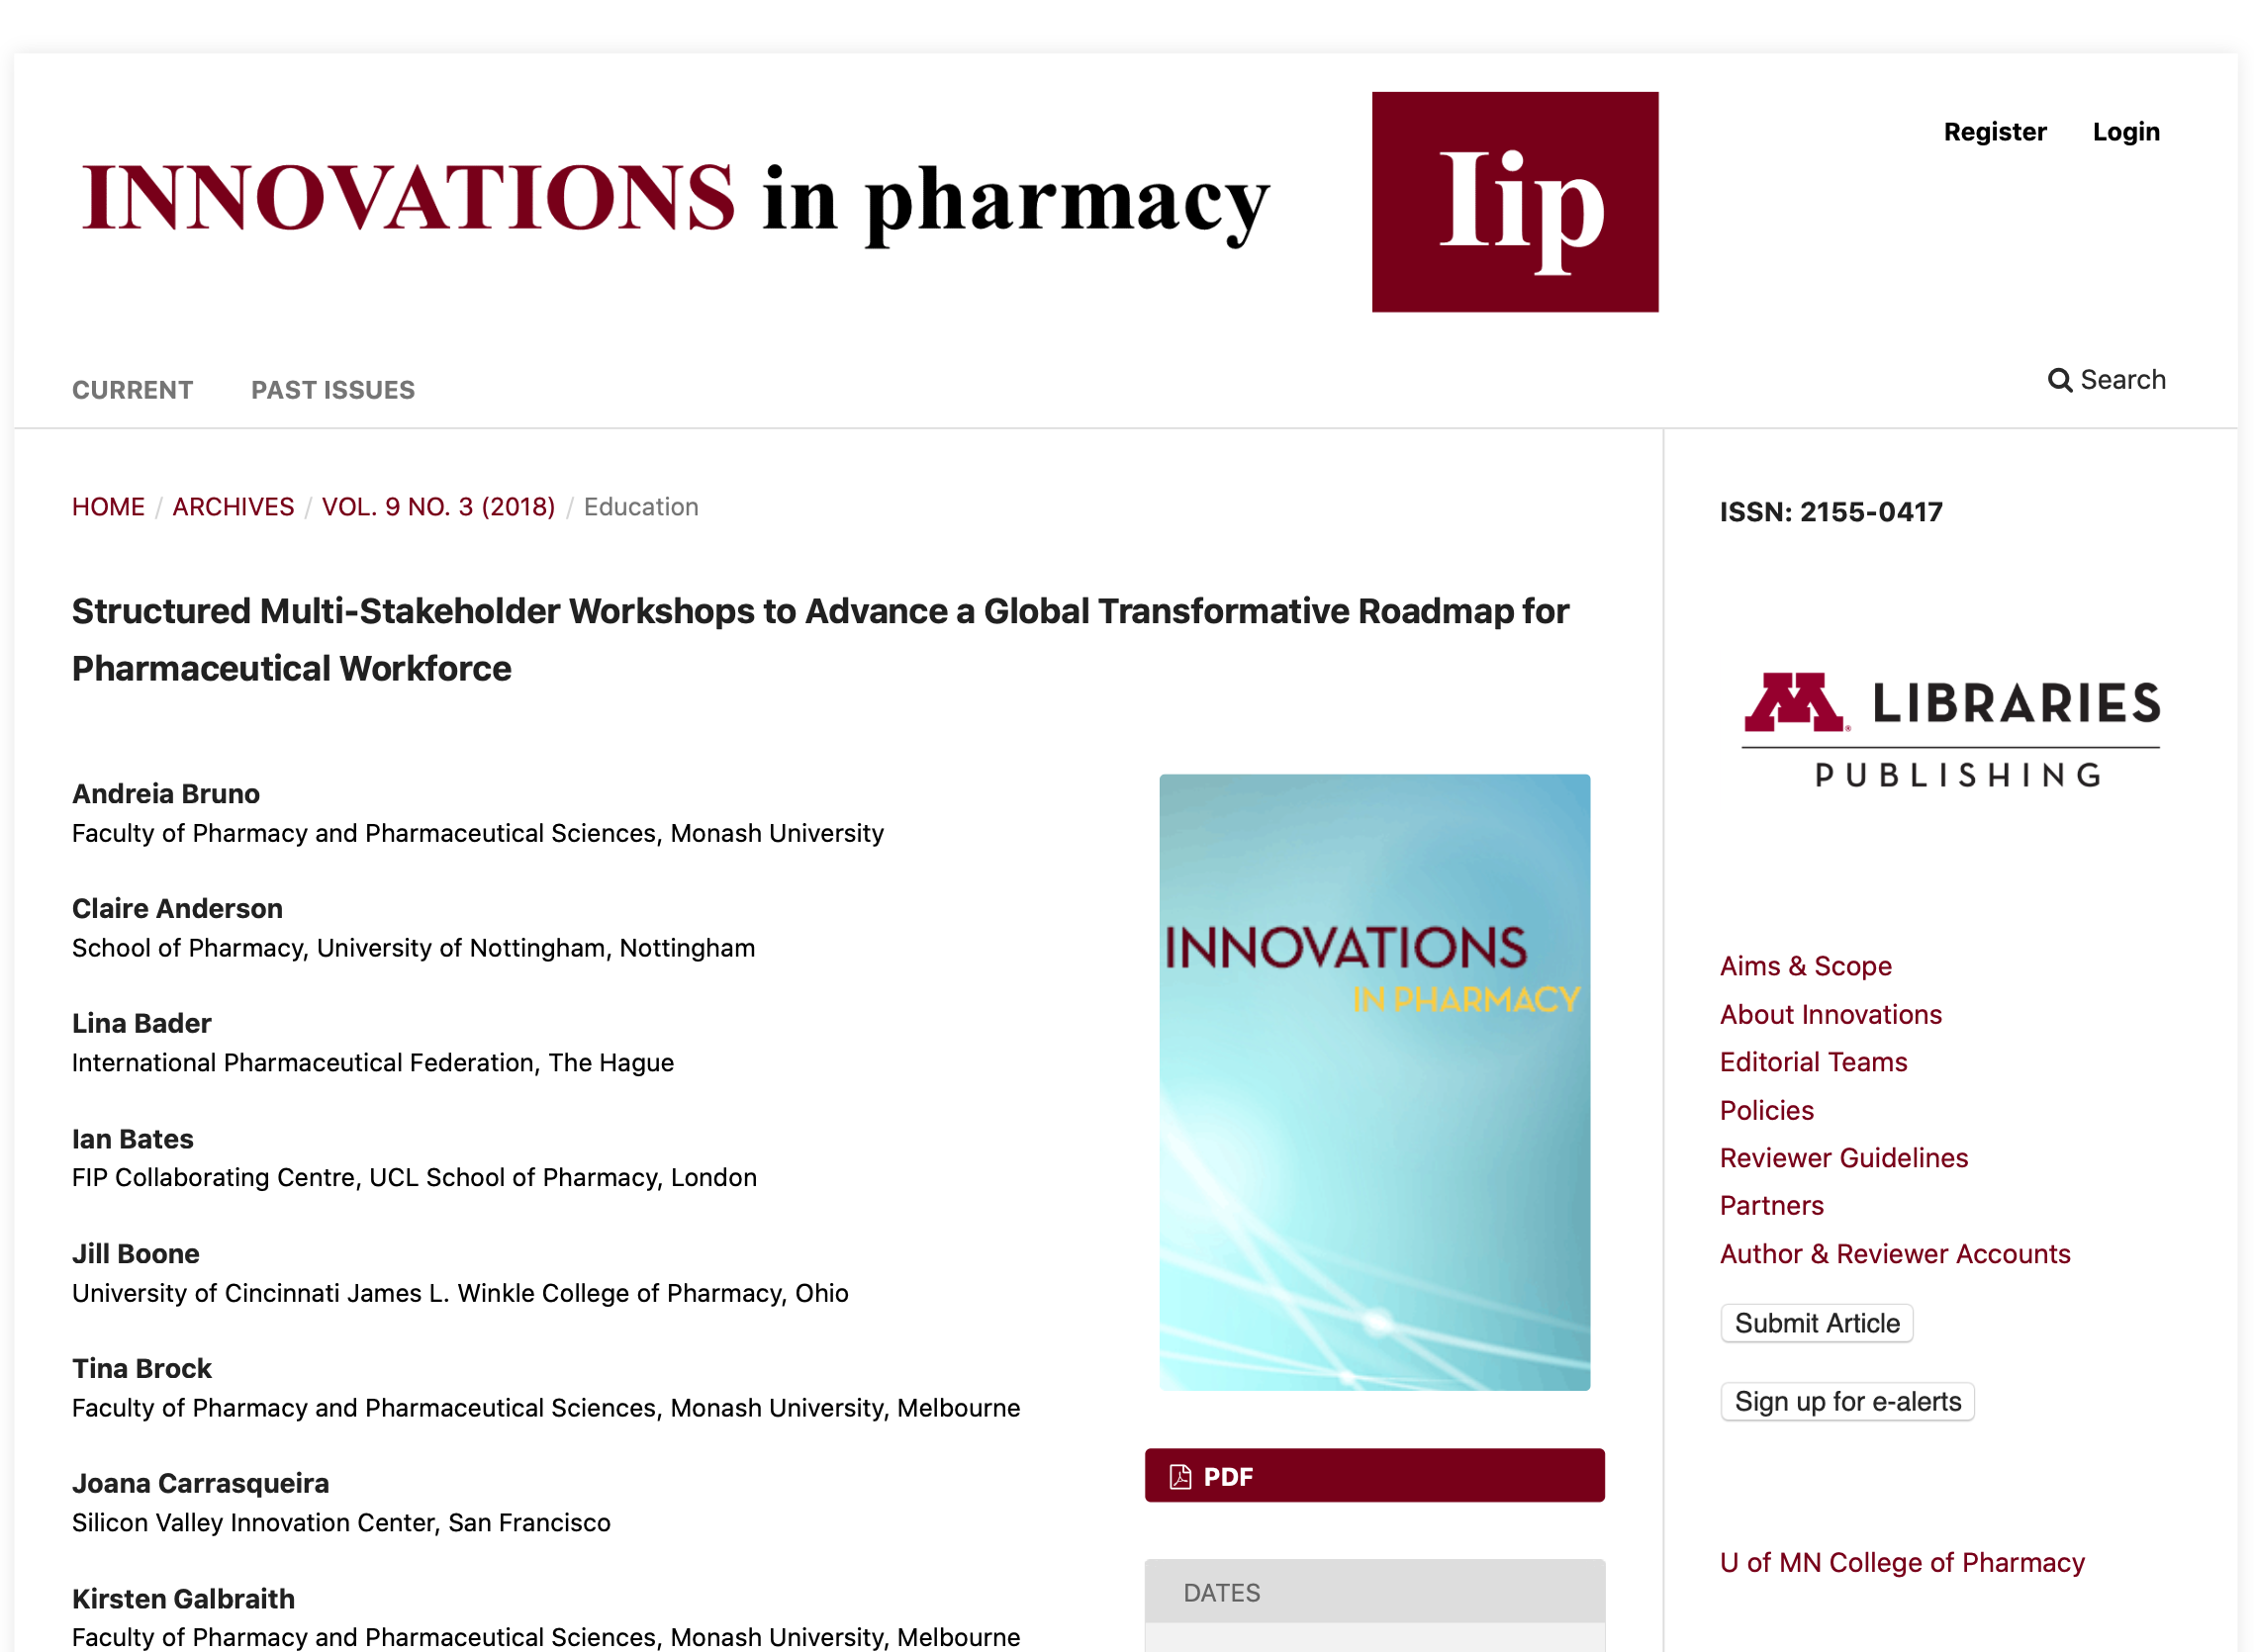 Structured Multi-Stakeholder Workshops to Advance a Global Transformative Roadmap for Pharmaceutical Workforce (2018) Thumbnail